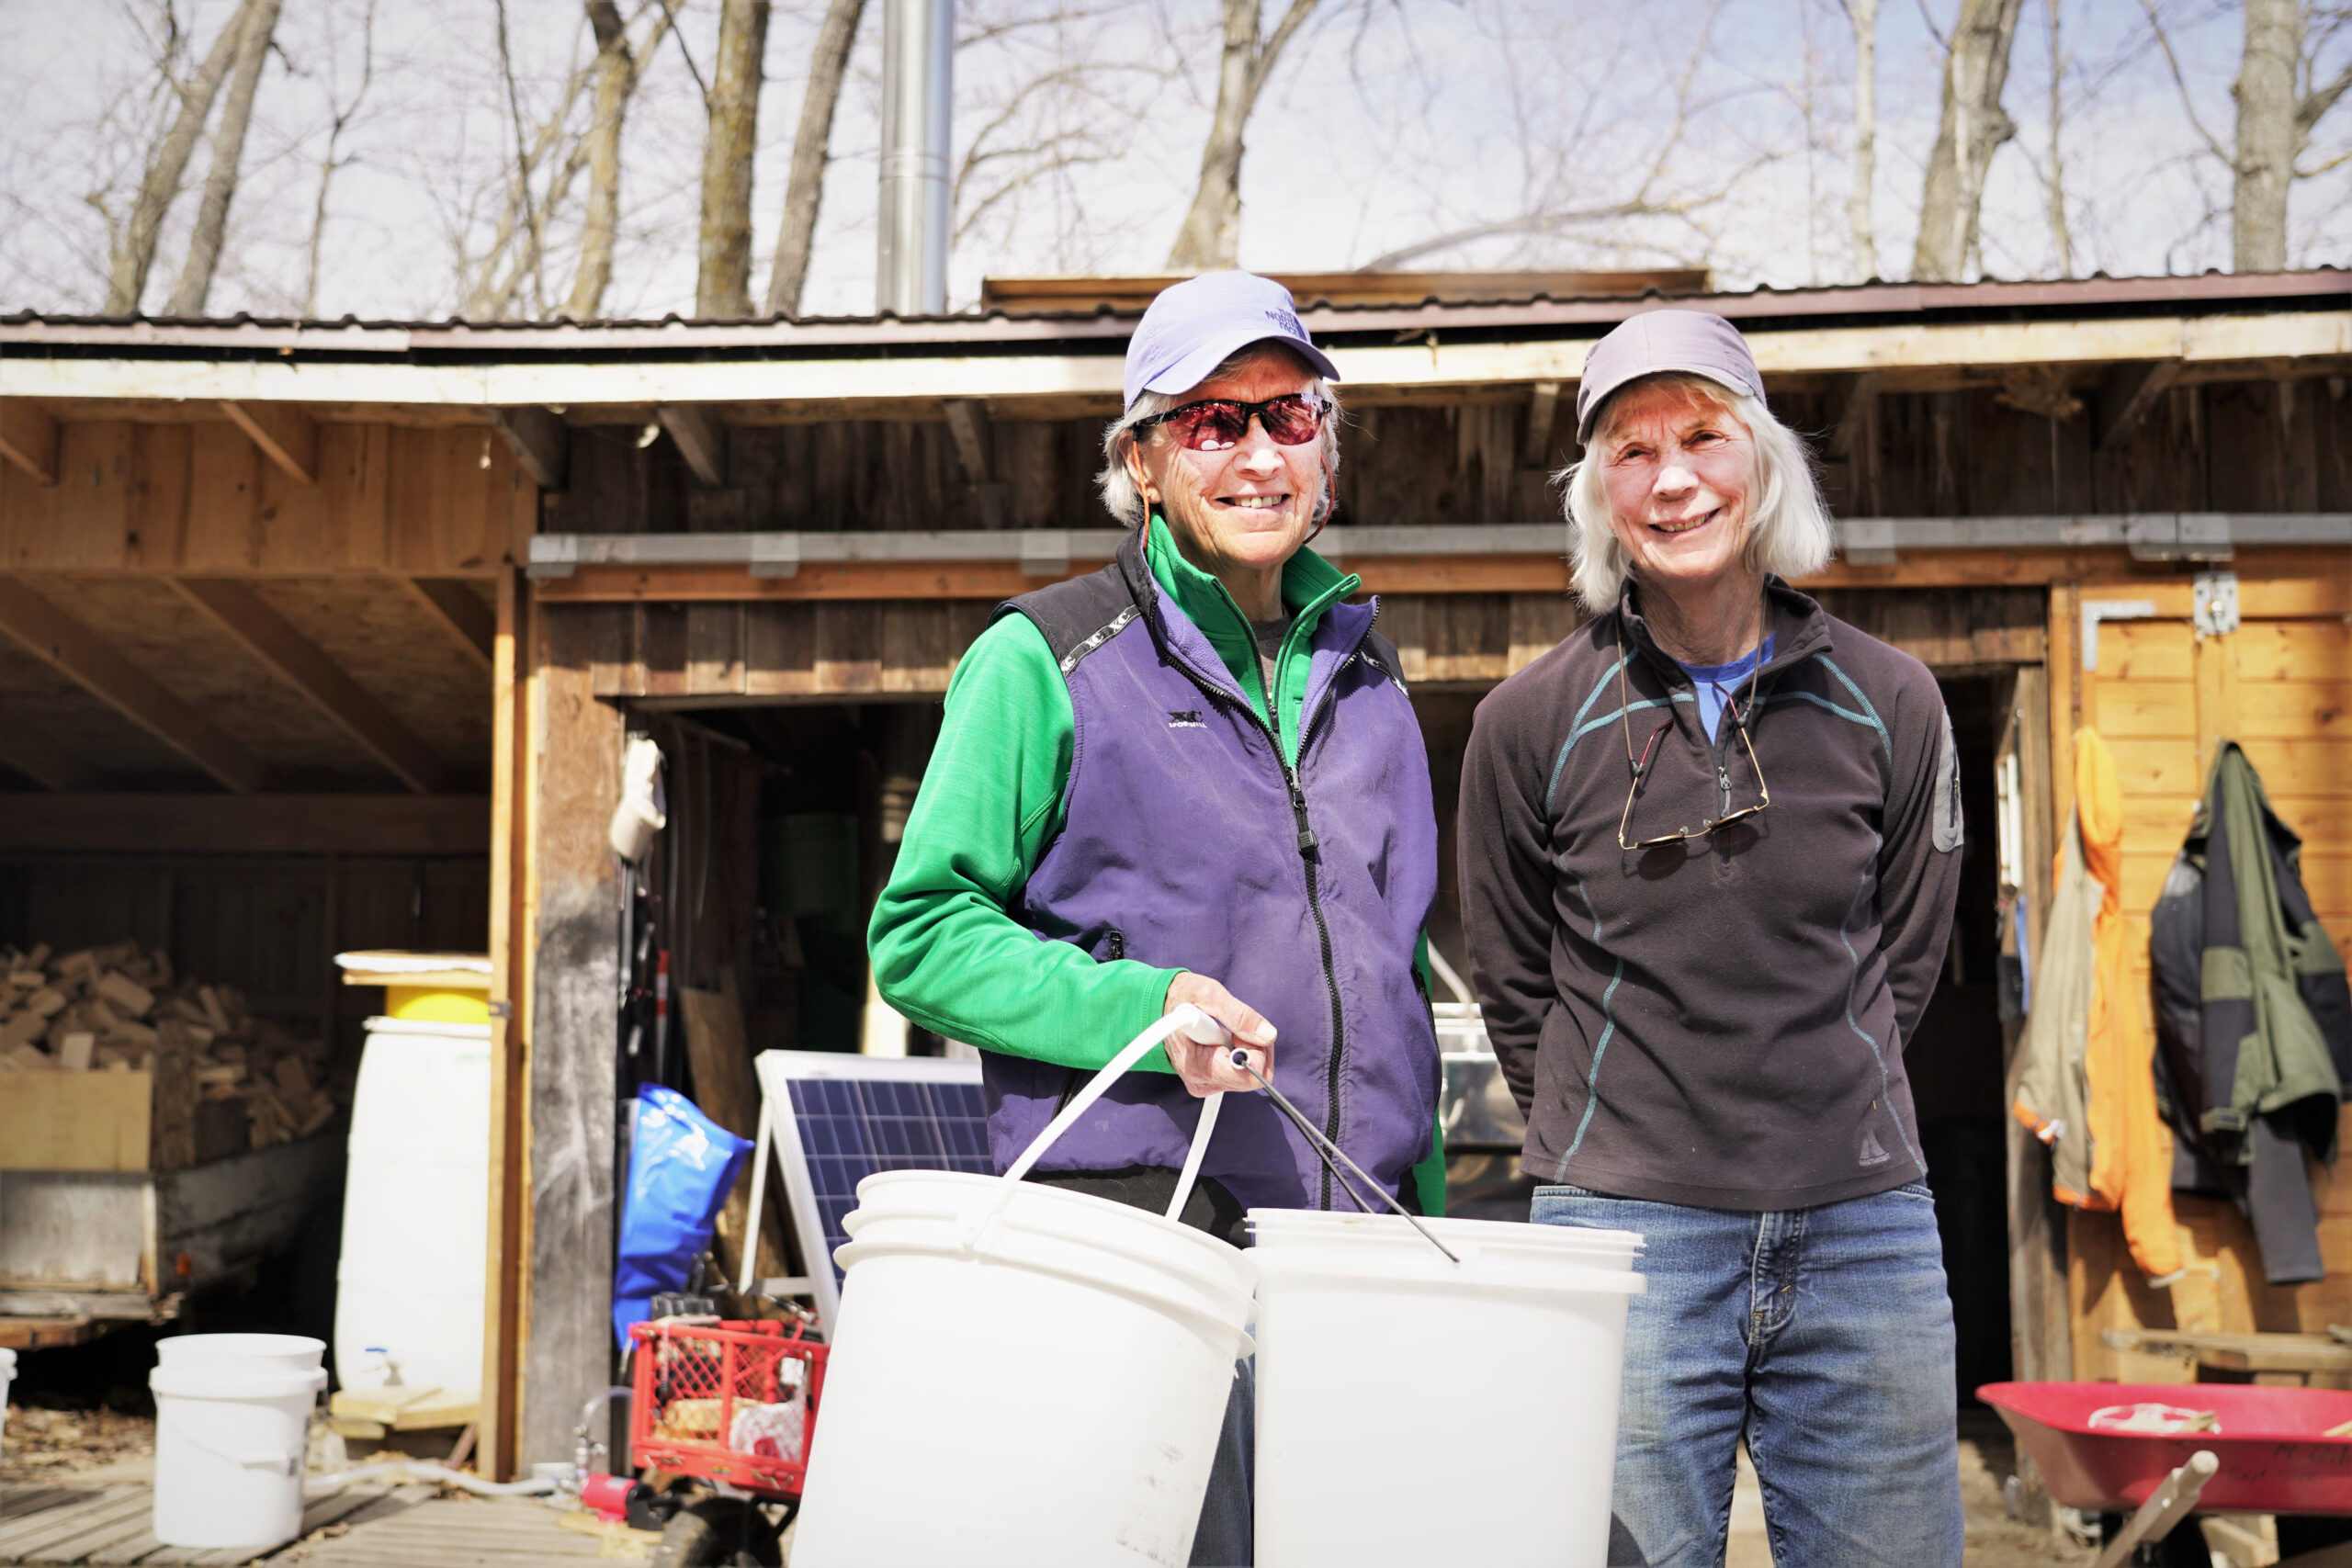 Donna Palivec, left, and Mur Gilman have a sweet gig: maple syruping. The two professors emeritae at Bemidji State University have discovered a rewarding passion in their springtime operation. (Micah Friez / Bemidji State)